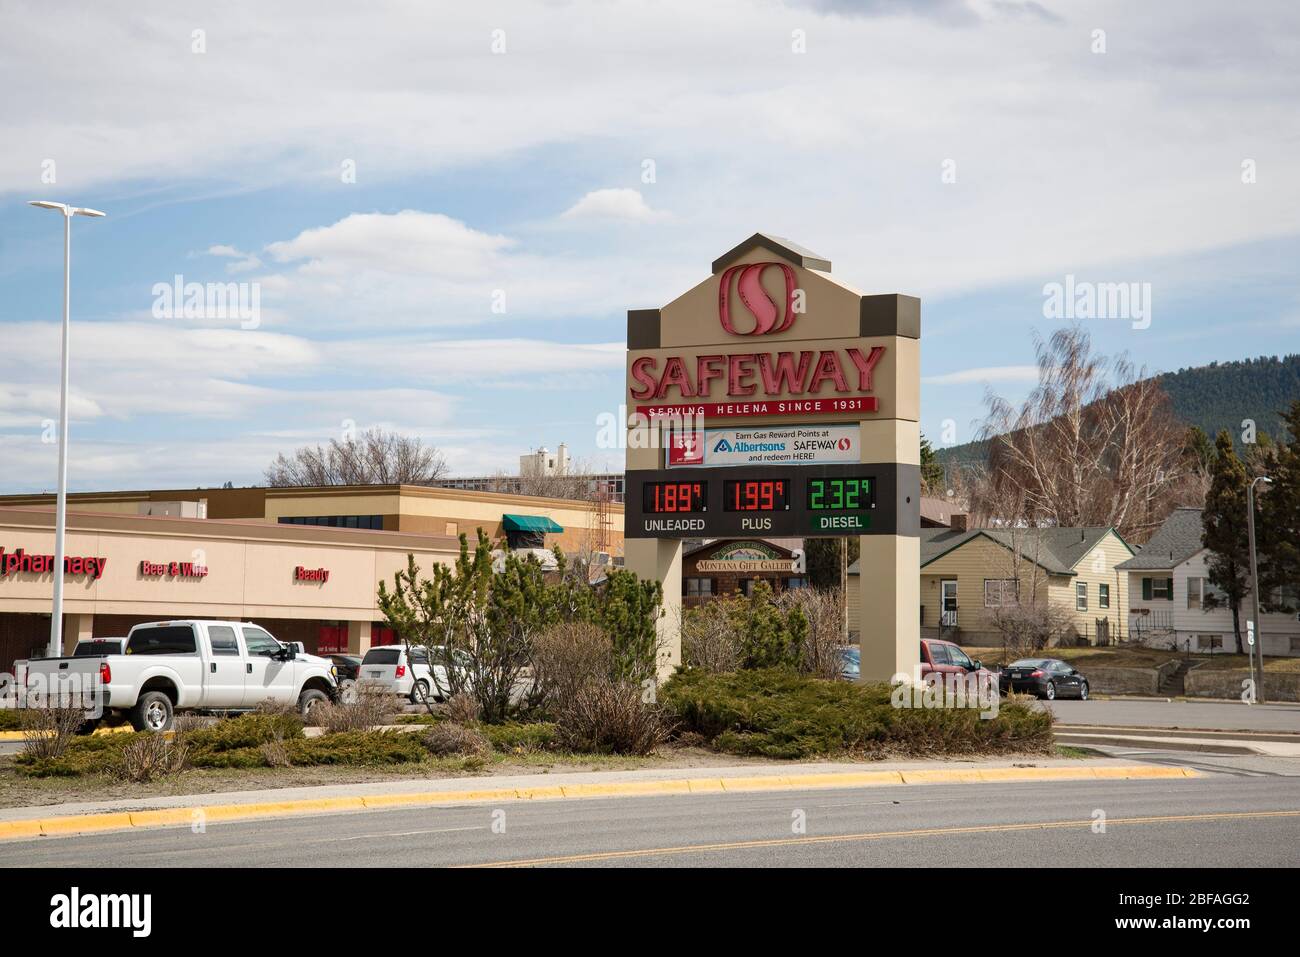 Helena, Montana - April 10, 2020: Safeway grocery store outdoor sign with low gas prices during Coronavirus Covid-19 shutdown. Under two dollars a gal Stock Photo